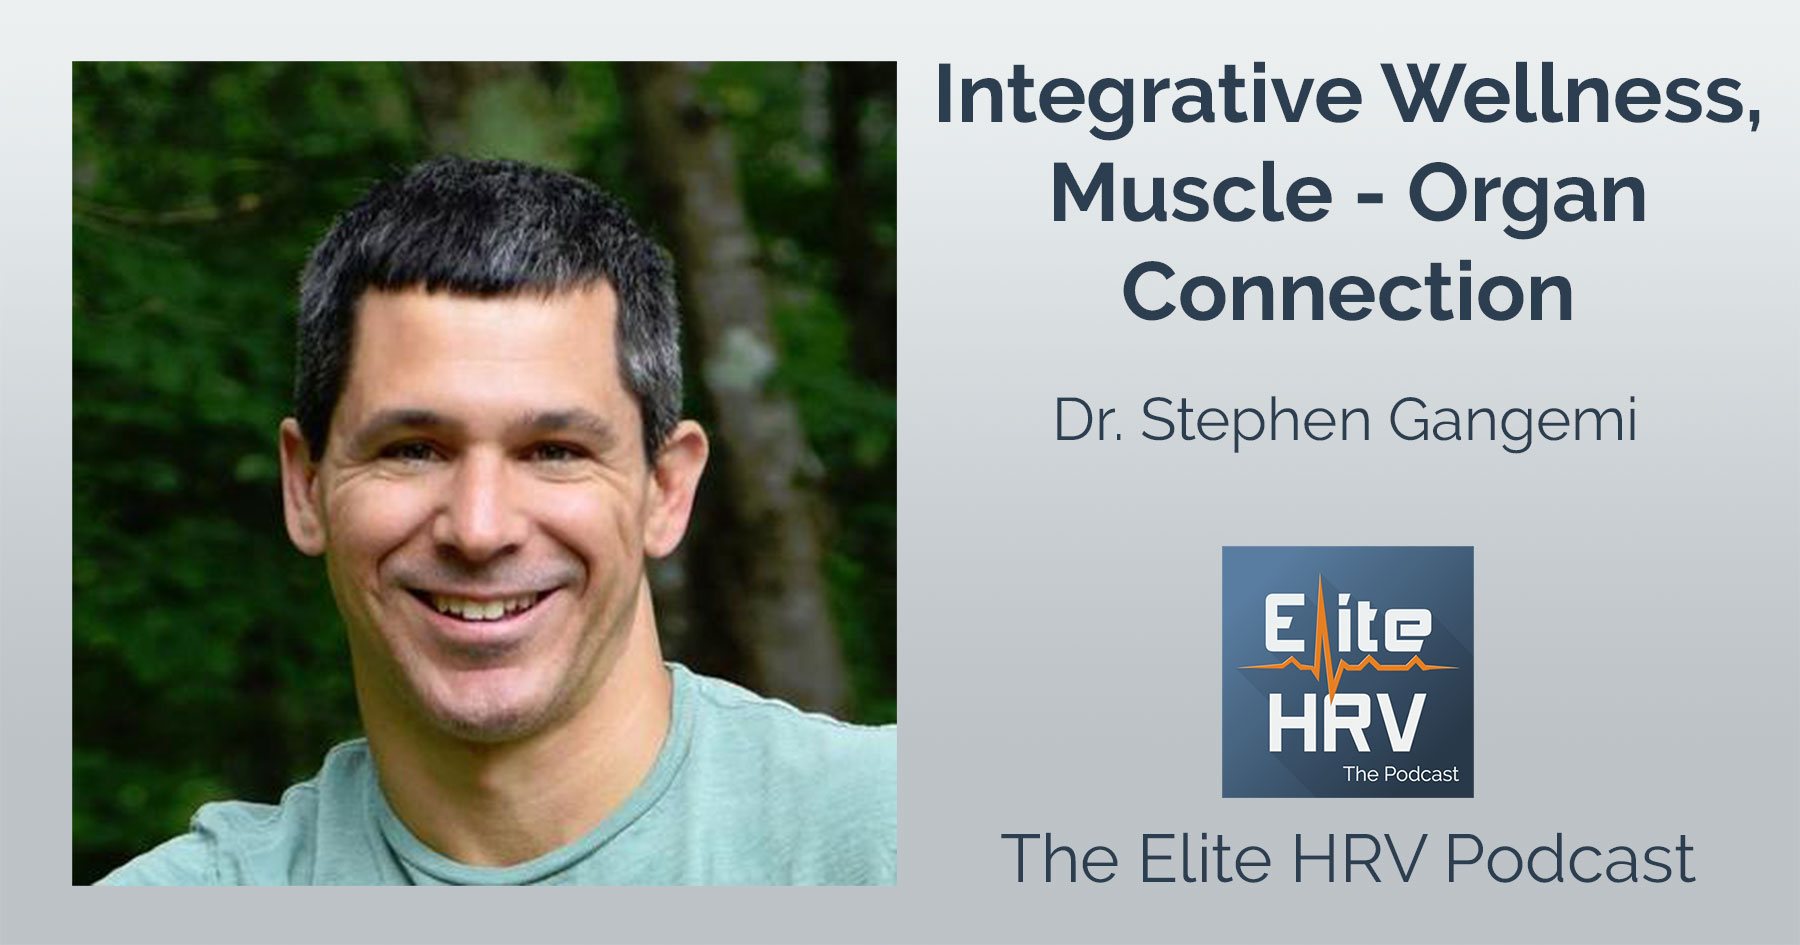 Integrative Wellness, Muscle-Organ Connection with Dr. Stephen Gangemi